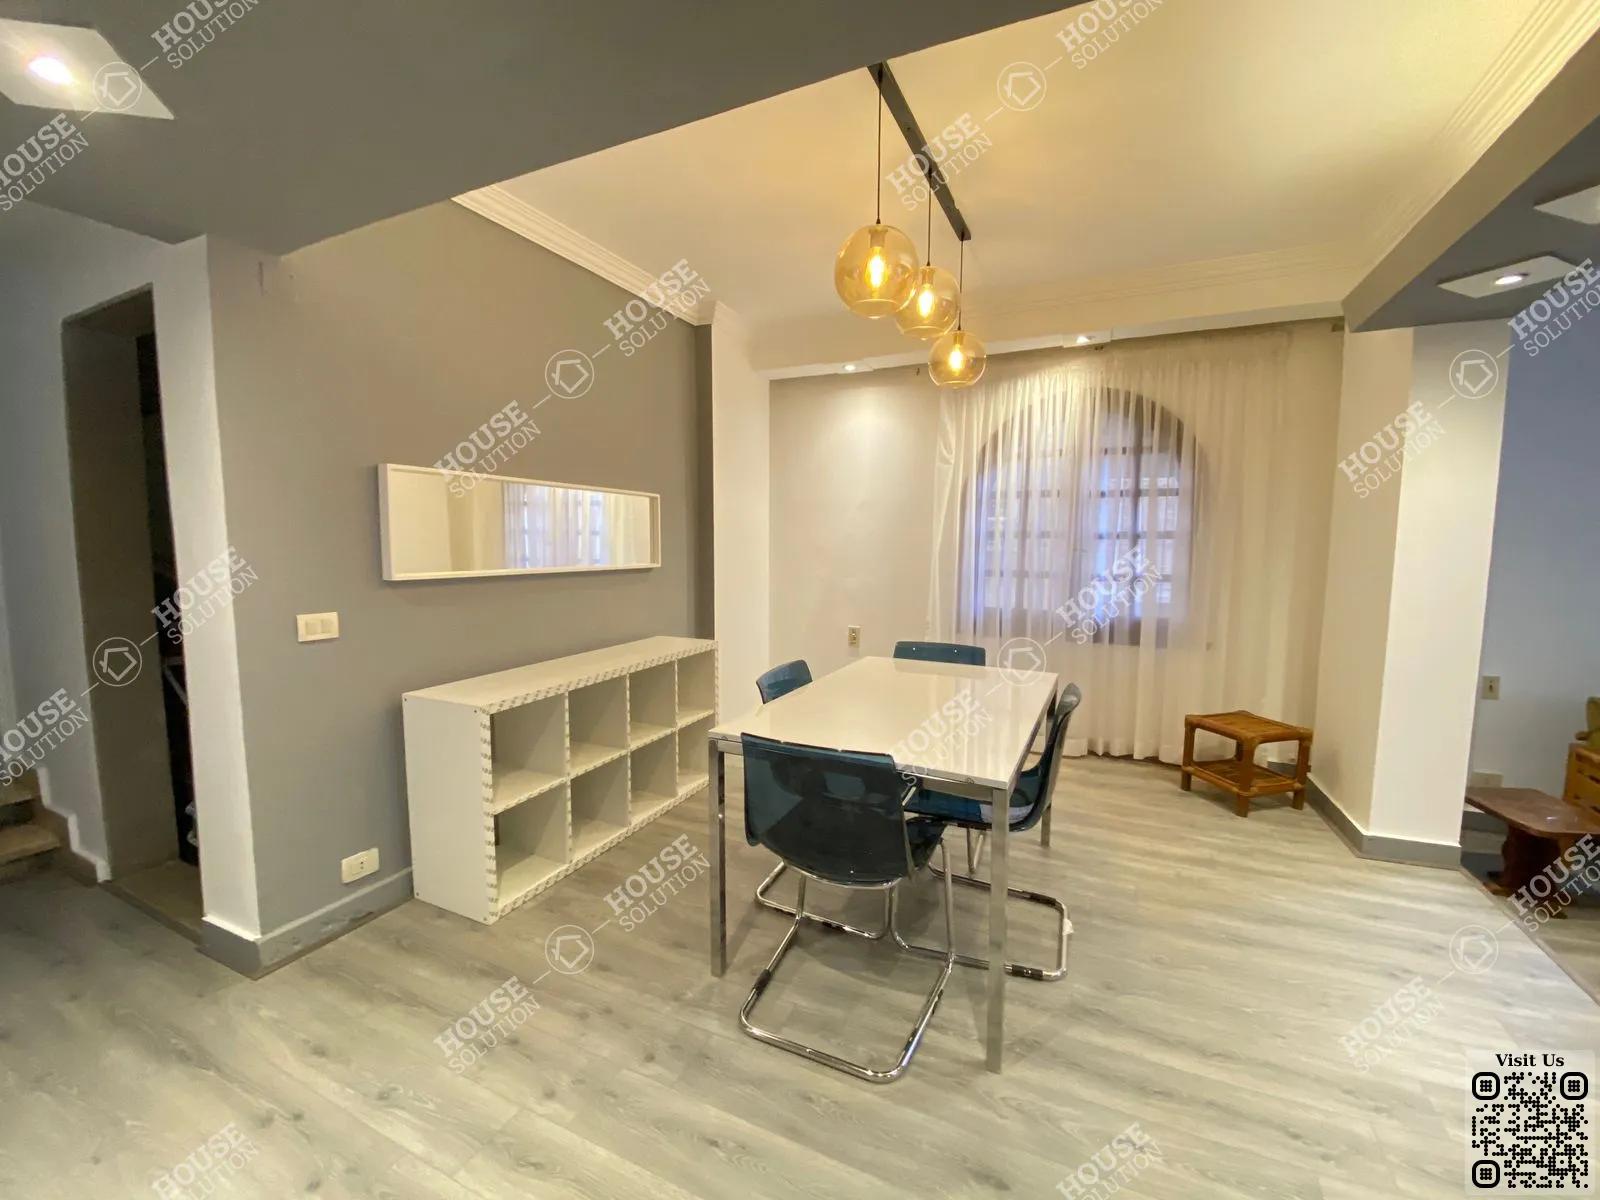 DINING AREA @ Apartments For Rent In Maadi Maadi Degla Area: 282 m² consists of 3 Bedrooms 3 Bathrooms Modern furnished 5 stars #5408-1